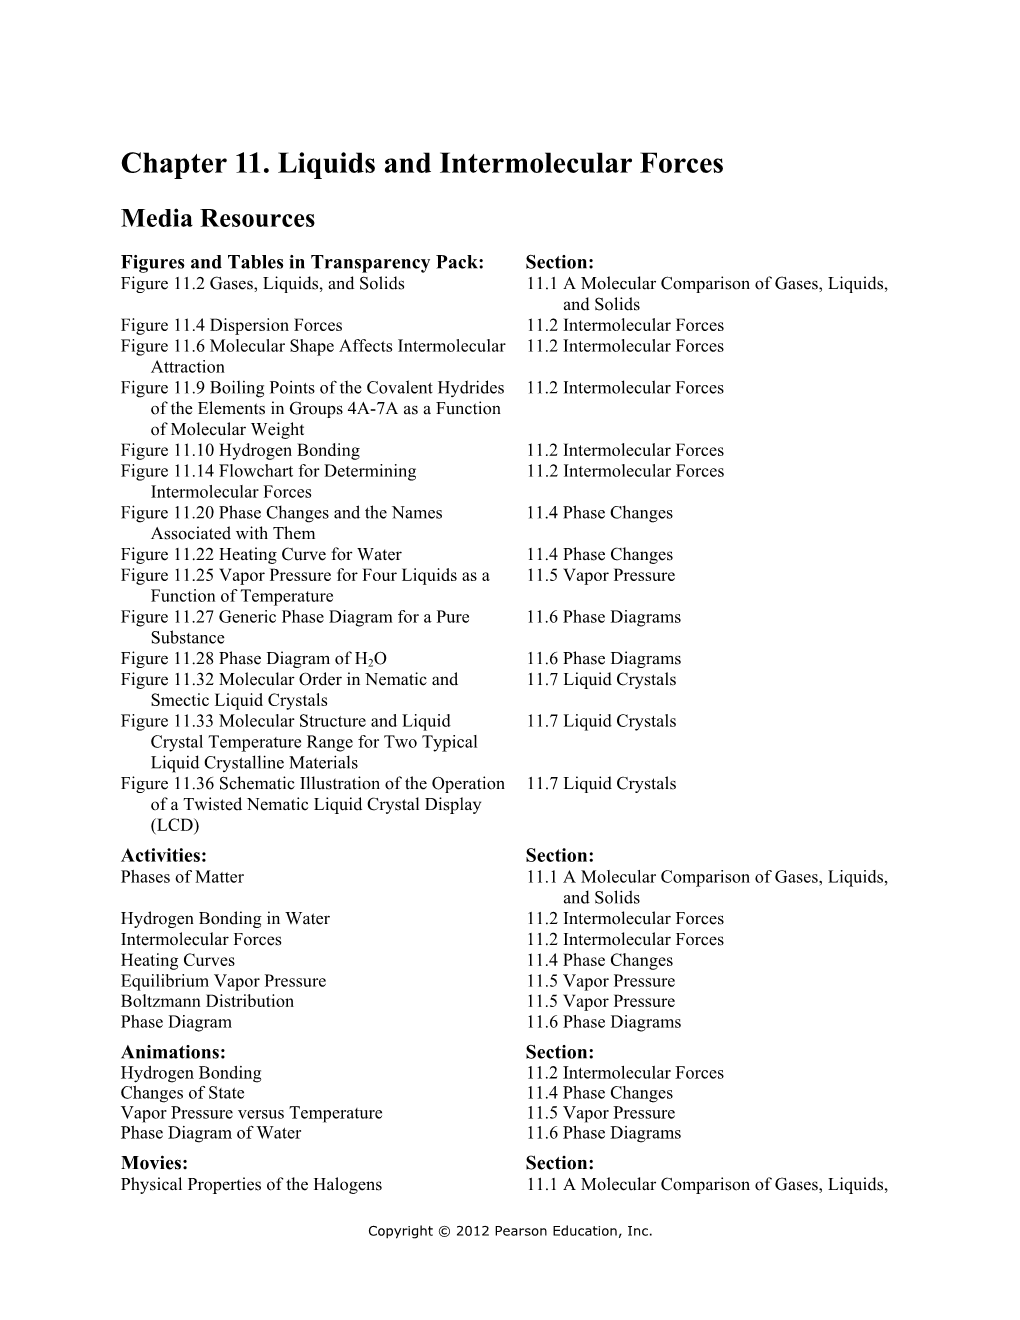 Chapter 11. Liquids and Intermolecular Forces